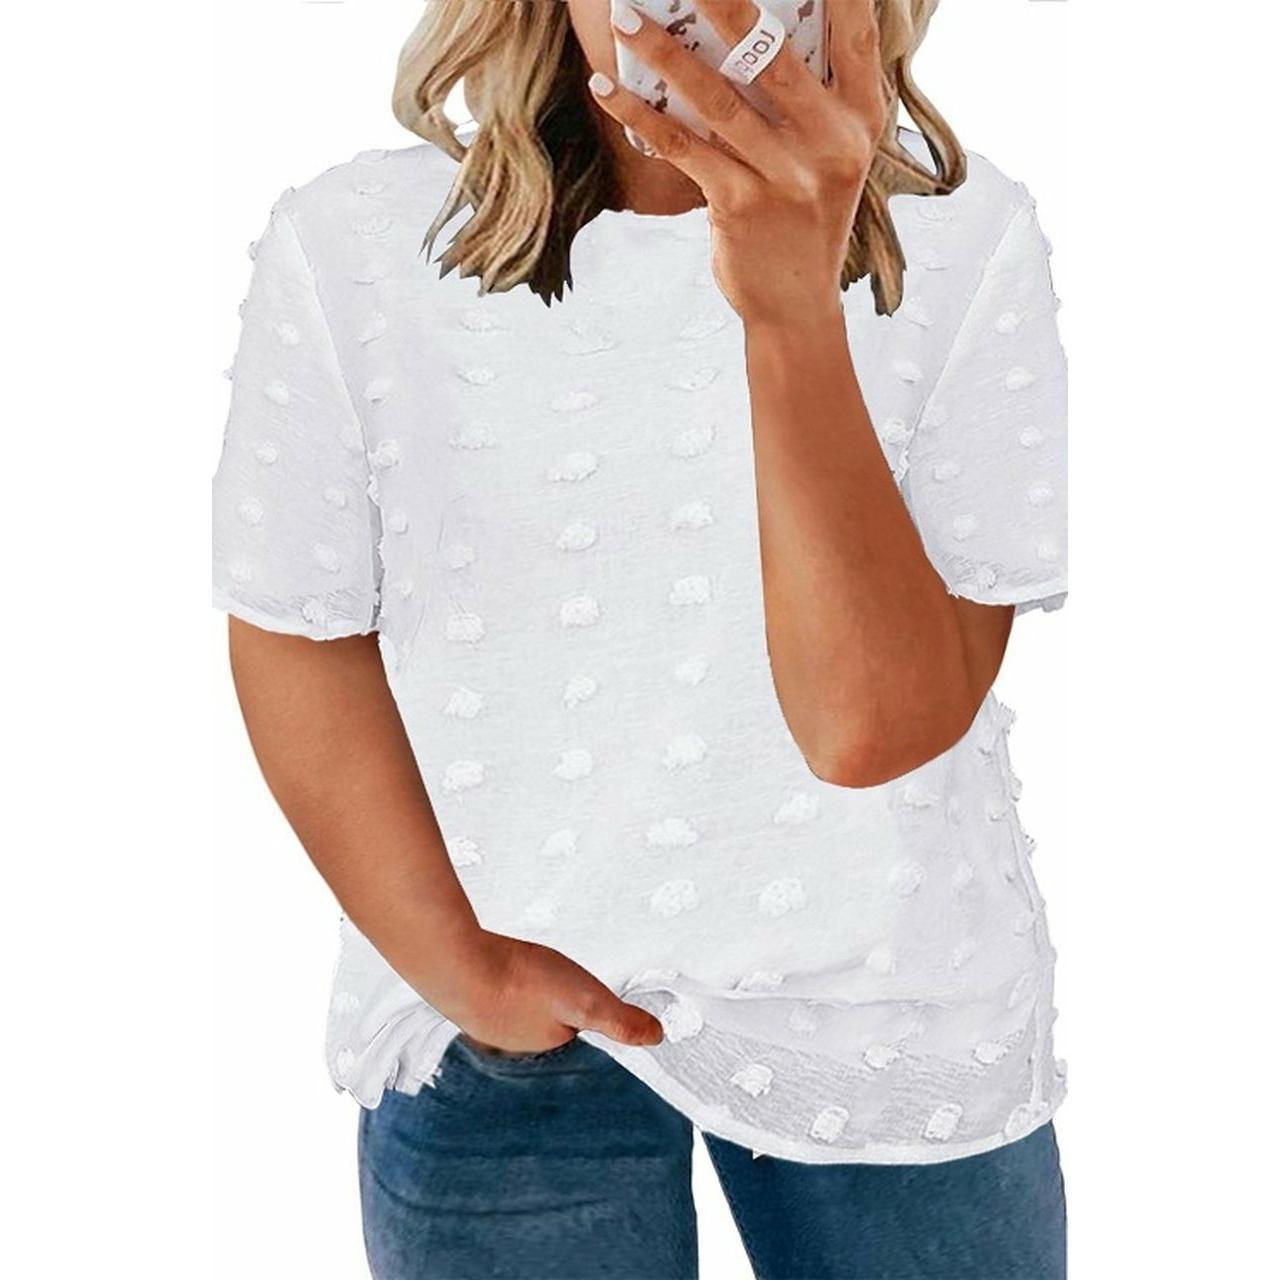 Plus size short sleeve white top